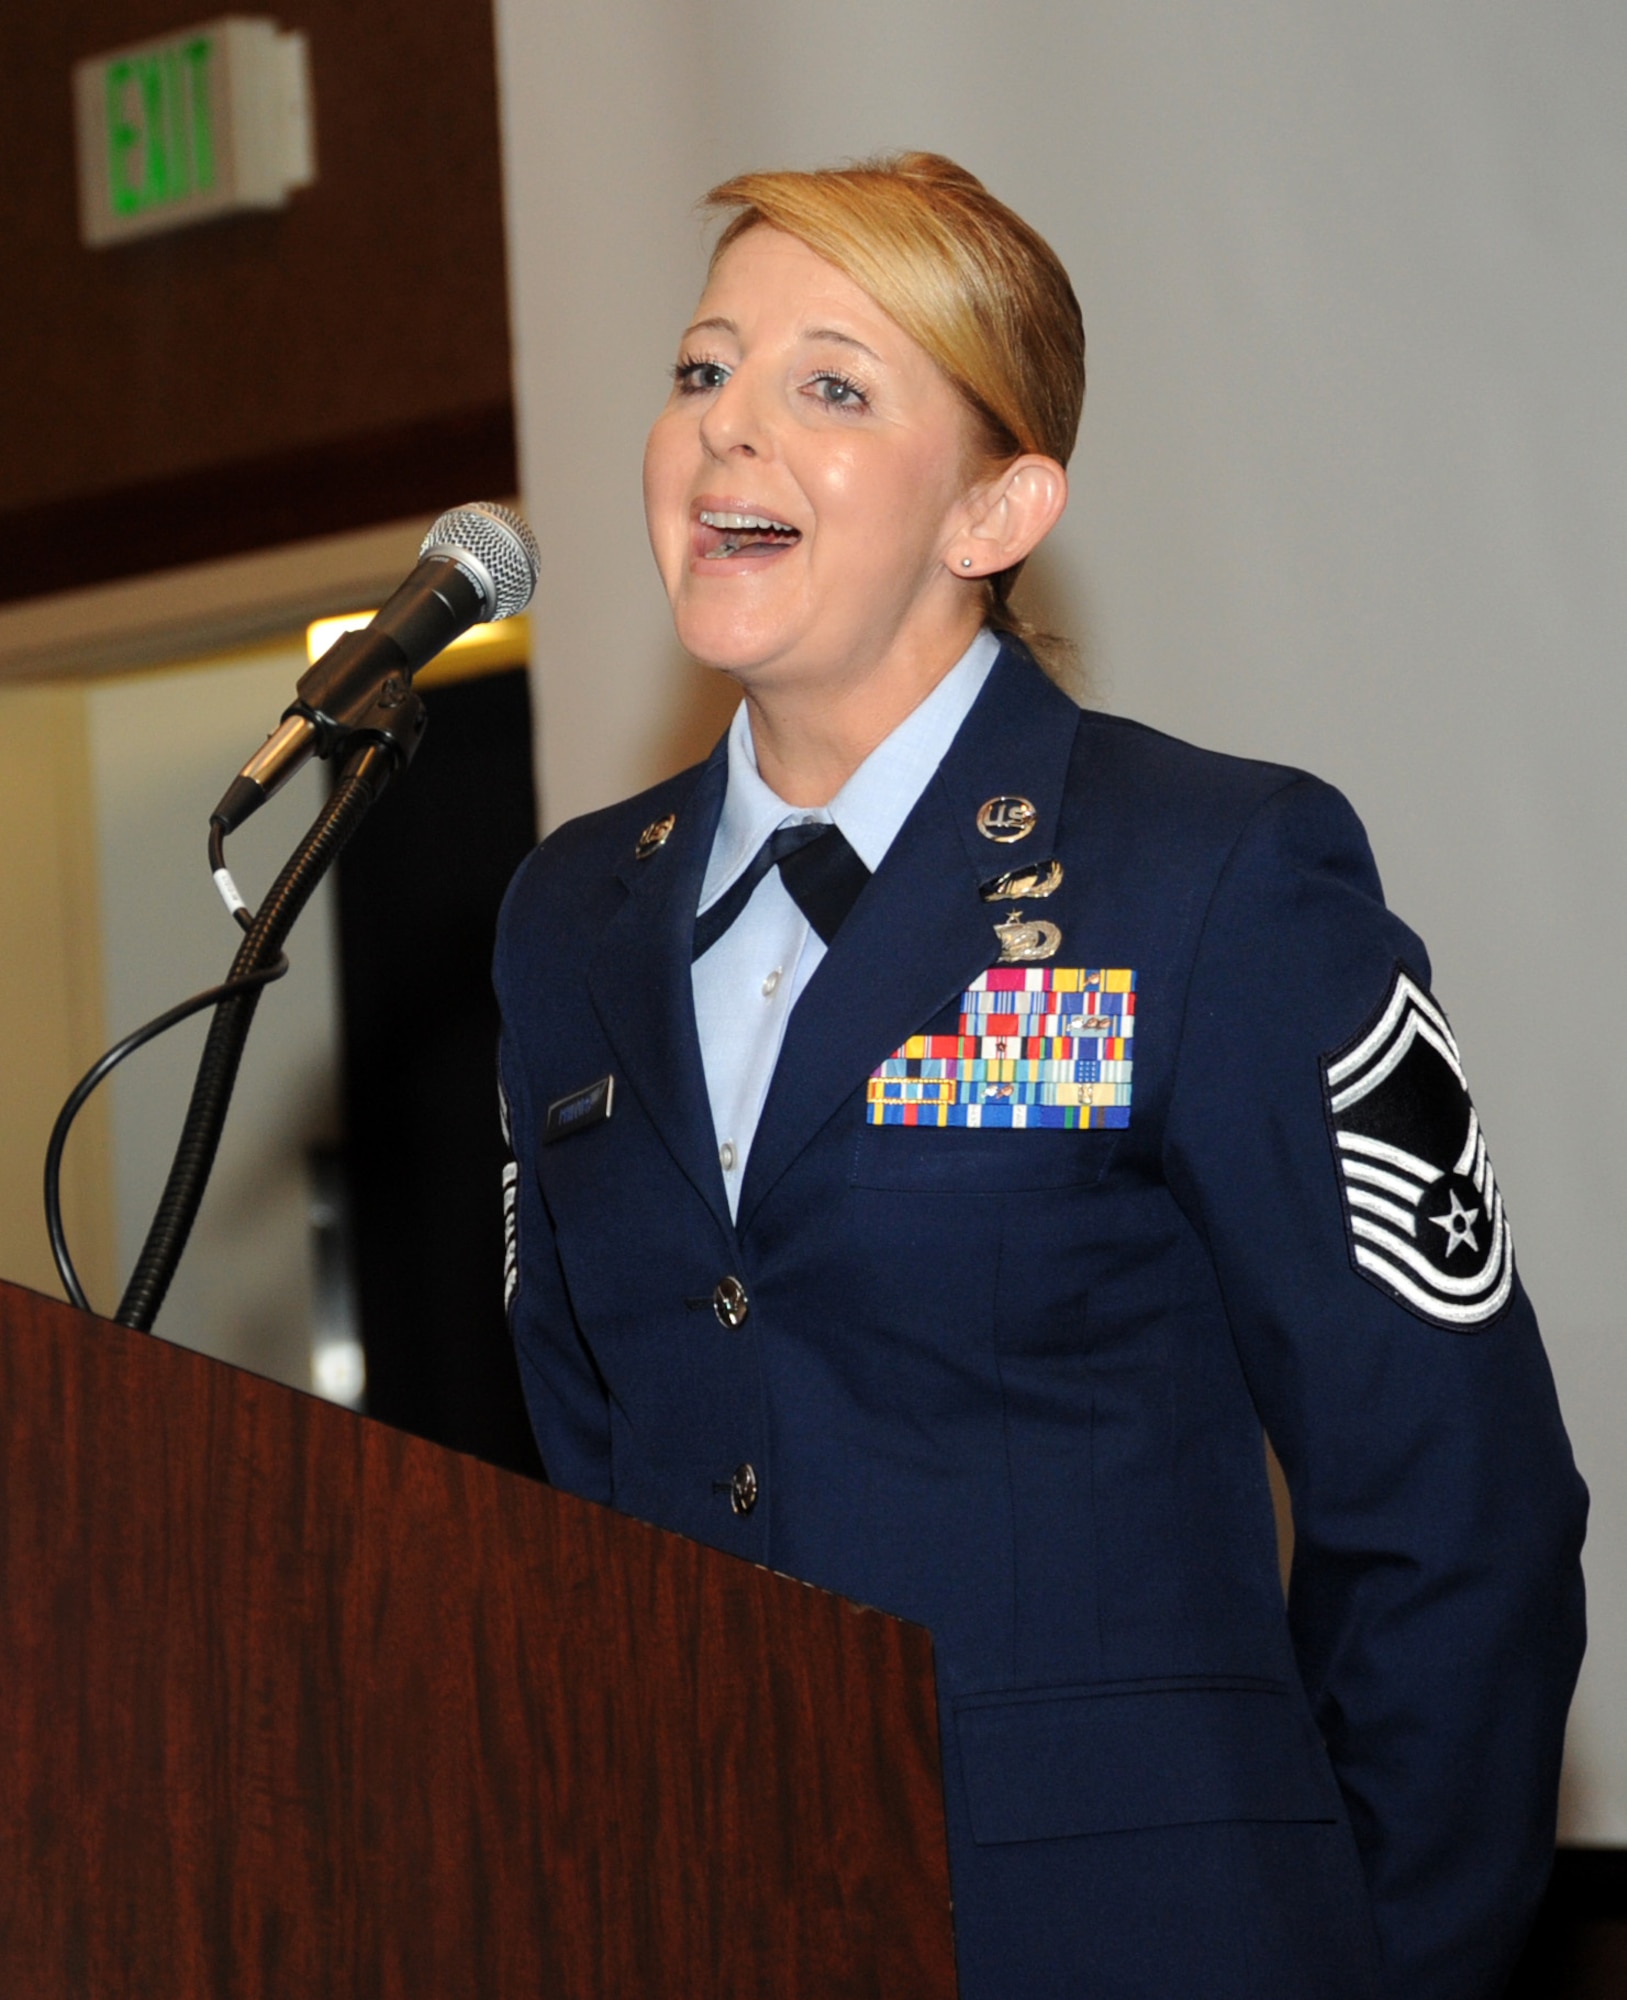 Oregon Air National Guard Senior Master Sgt. Denise Phillips, assigned to the 142nd Fighter Wing Mission Support Group, performs the National Anthem to begin the 21st Annual Oregon Air National Guard Awards Banquet, March 14, 2015, Portland, Ore. (U.S. Air National Guard photo by Tech. Sgt. Emily Thompson, 142nd Fighter Wing Public Affairs/Released)